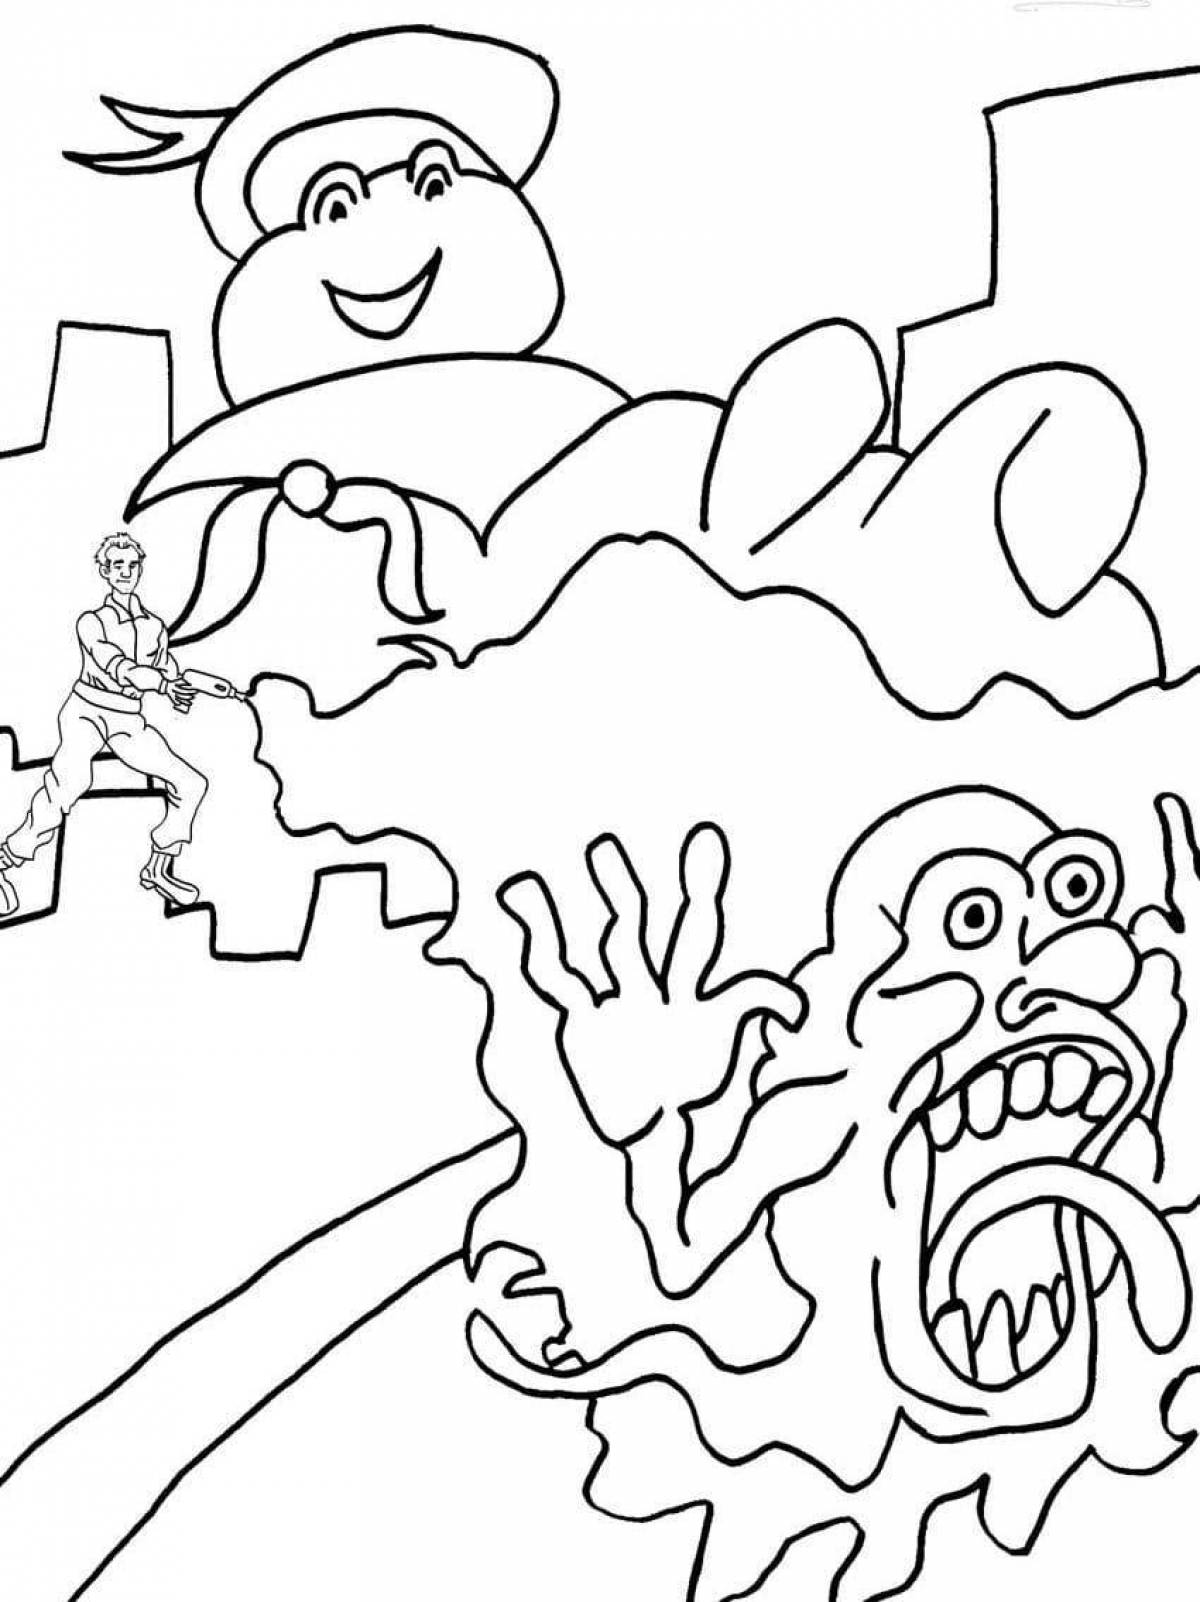 Charming ghostbusters coloring page